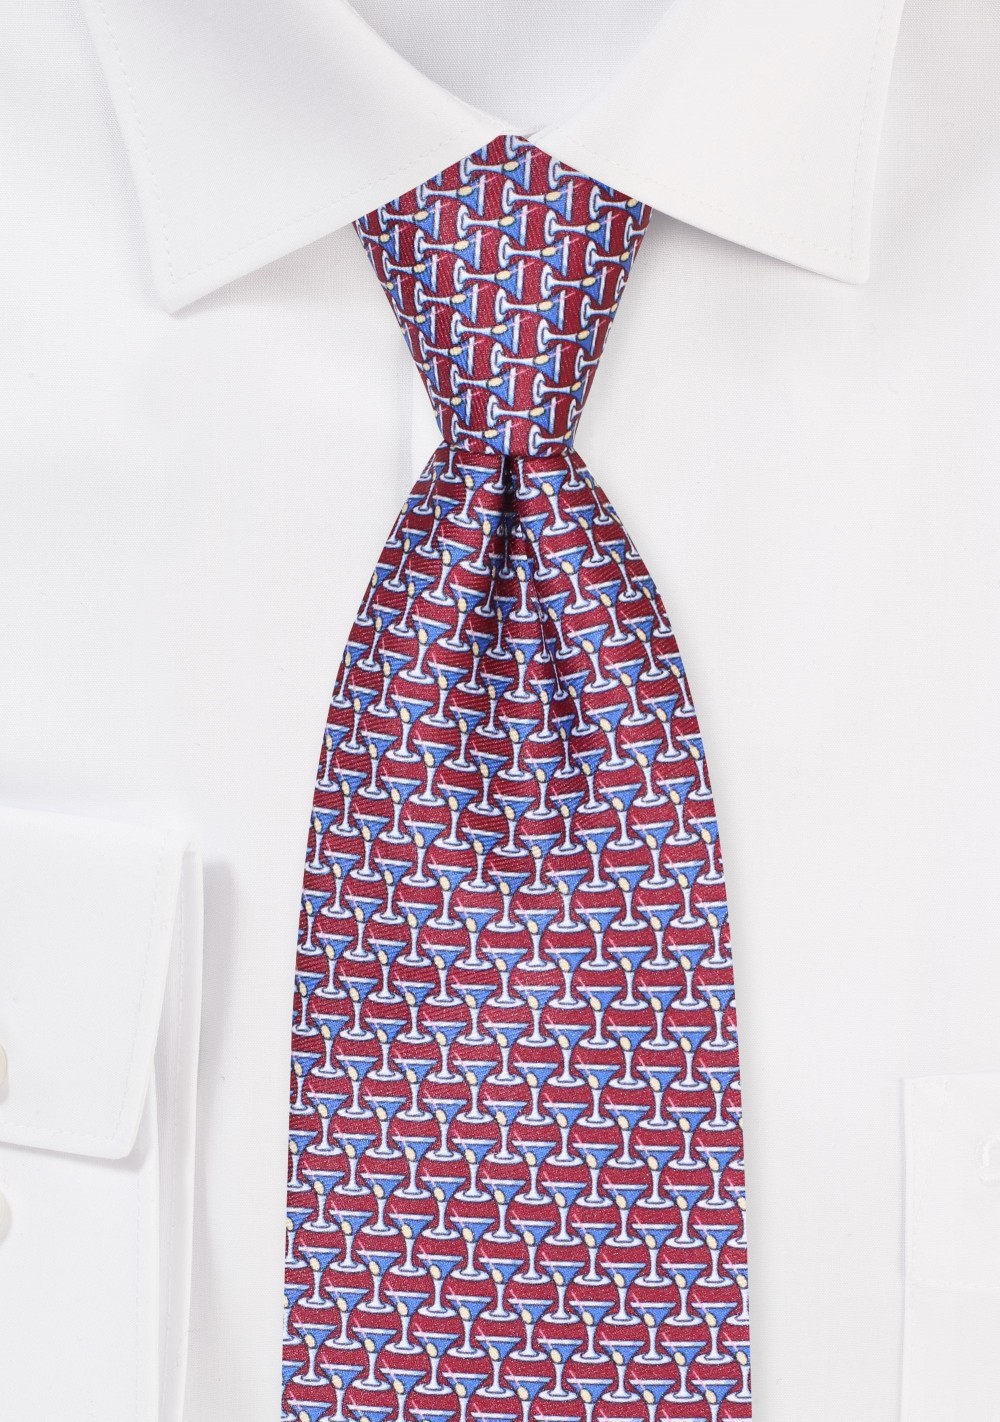 Cherry Red Tie with Martini Glasses